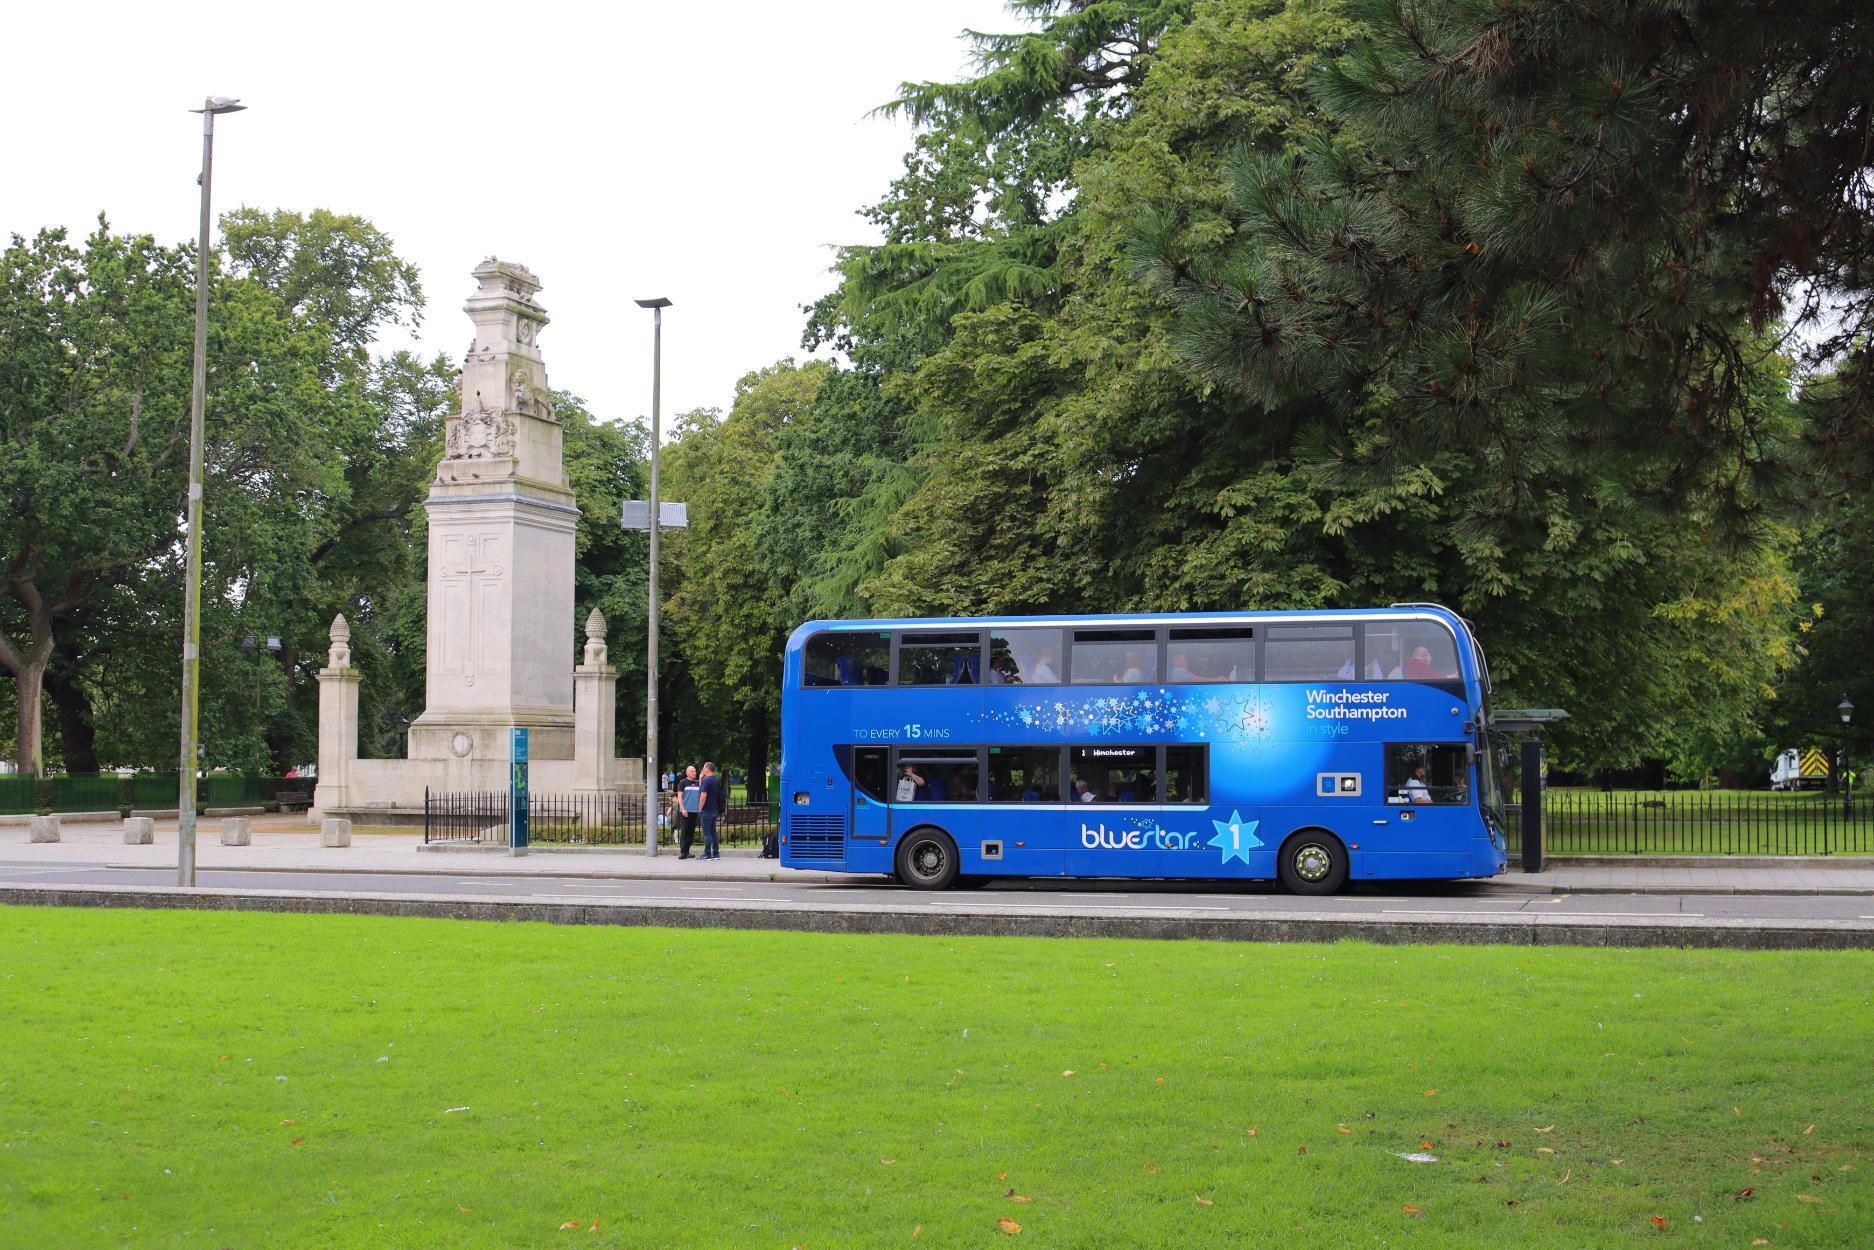 Bluestar number 1 bus stopped at bus stop near Cenotaph